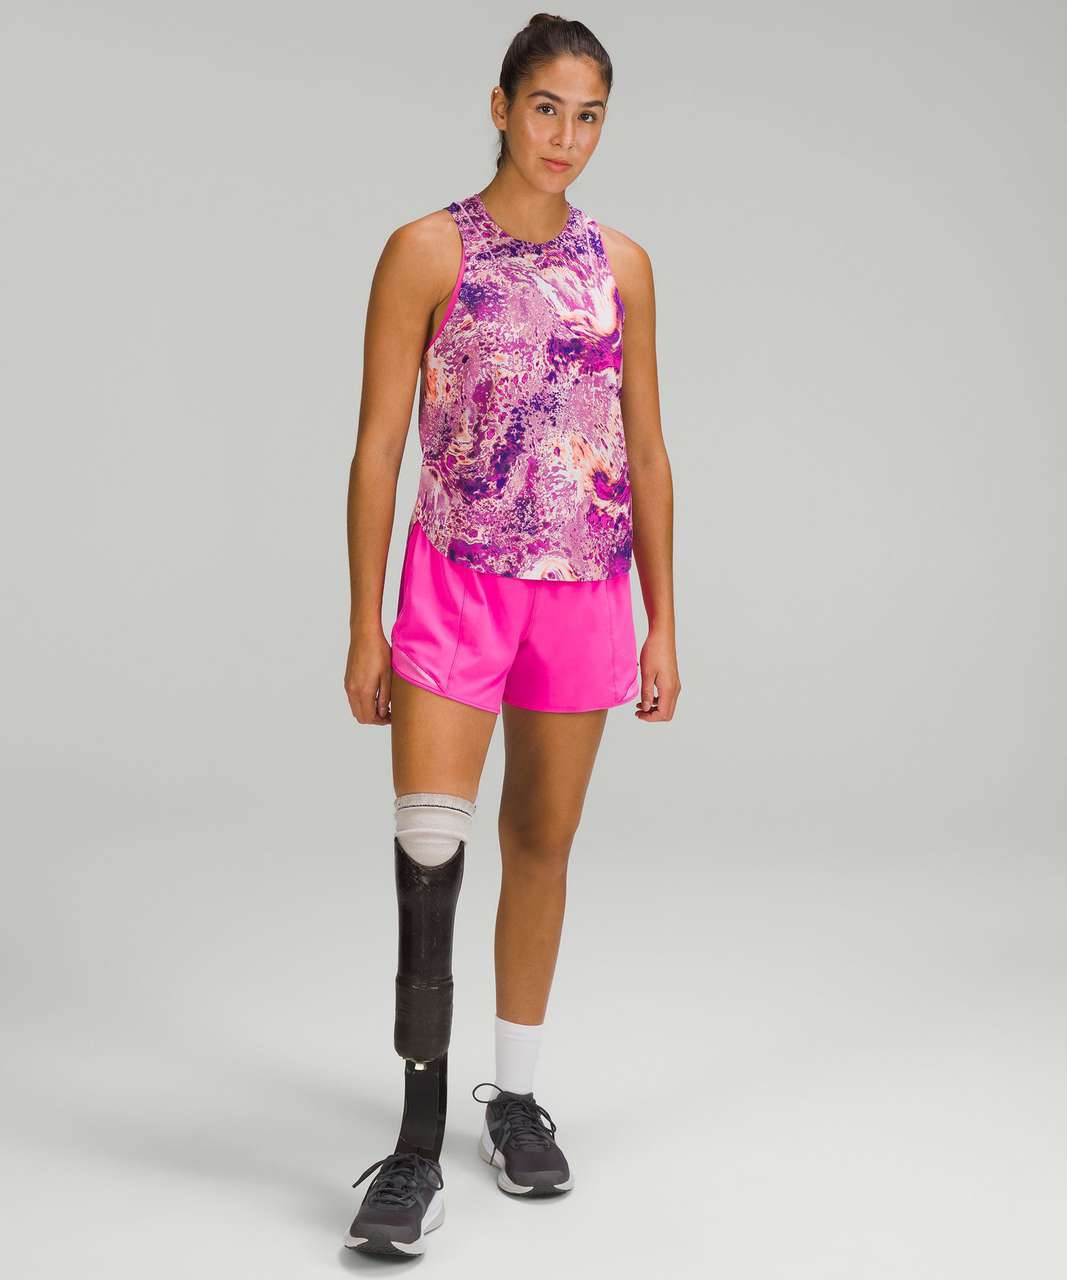 Lululemon Hotty Hot High-Rise Lined Short 4" - Pow Pink (First Release)